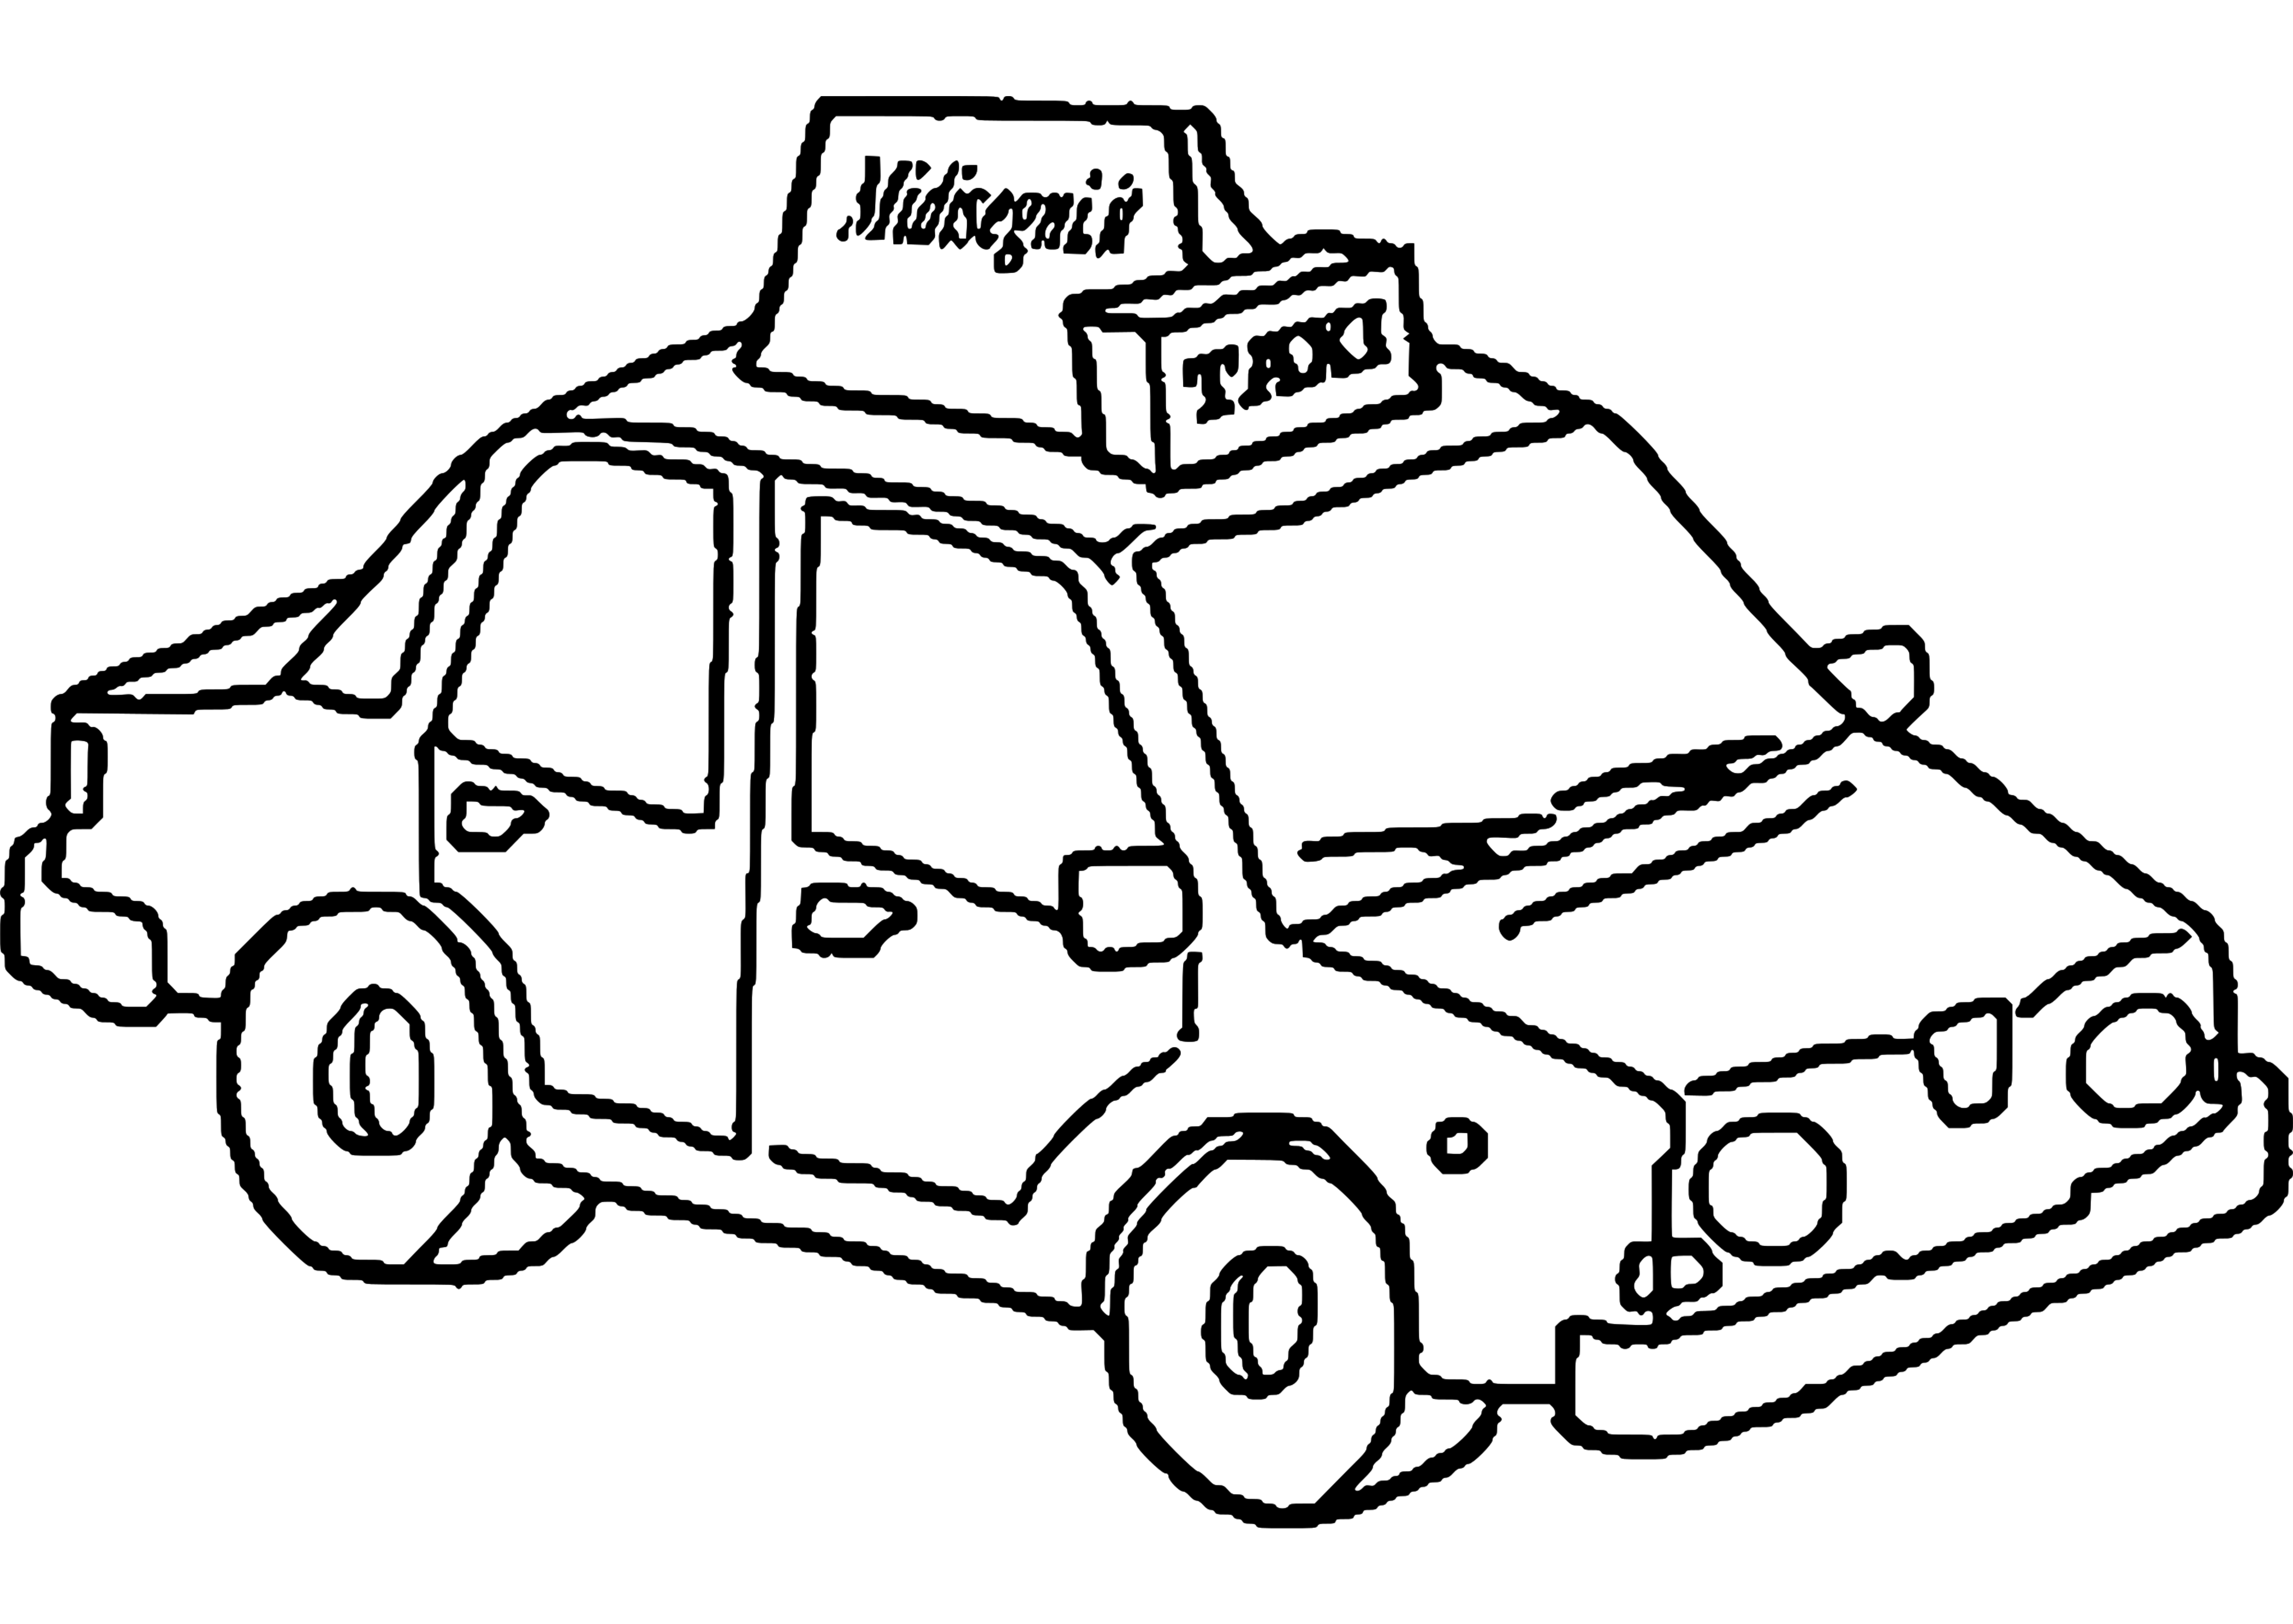 Download Taxi #137211 (Transportation) - Printable coloring pages